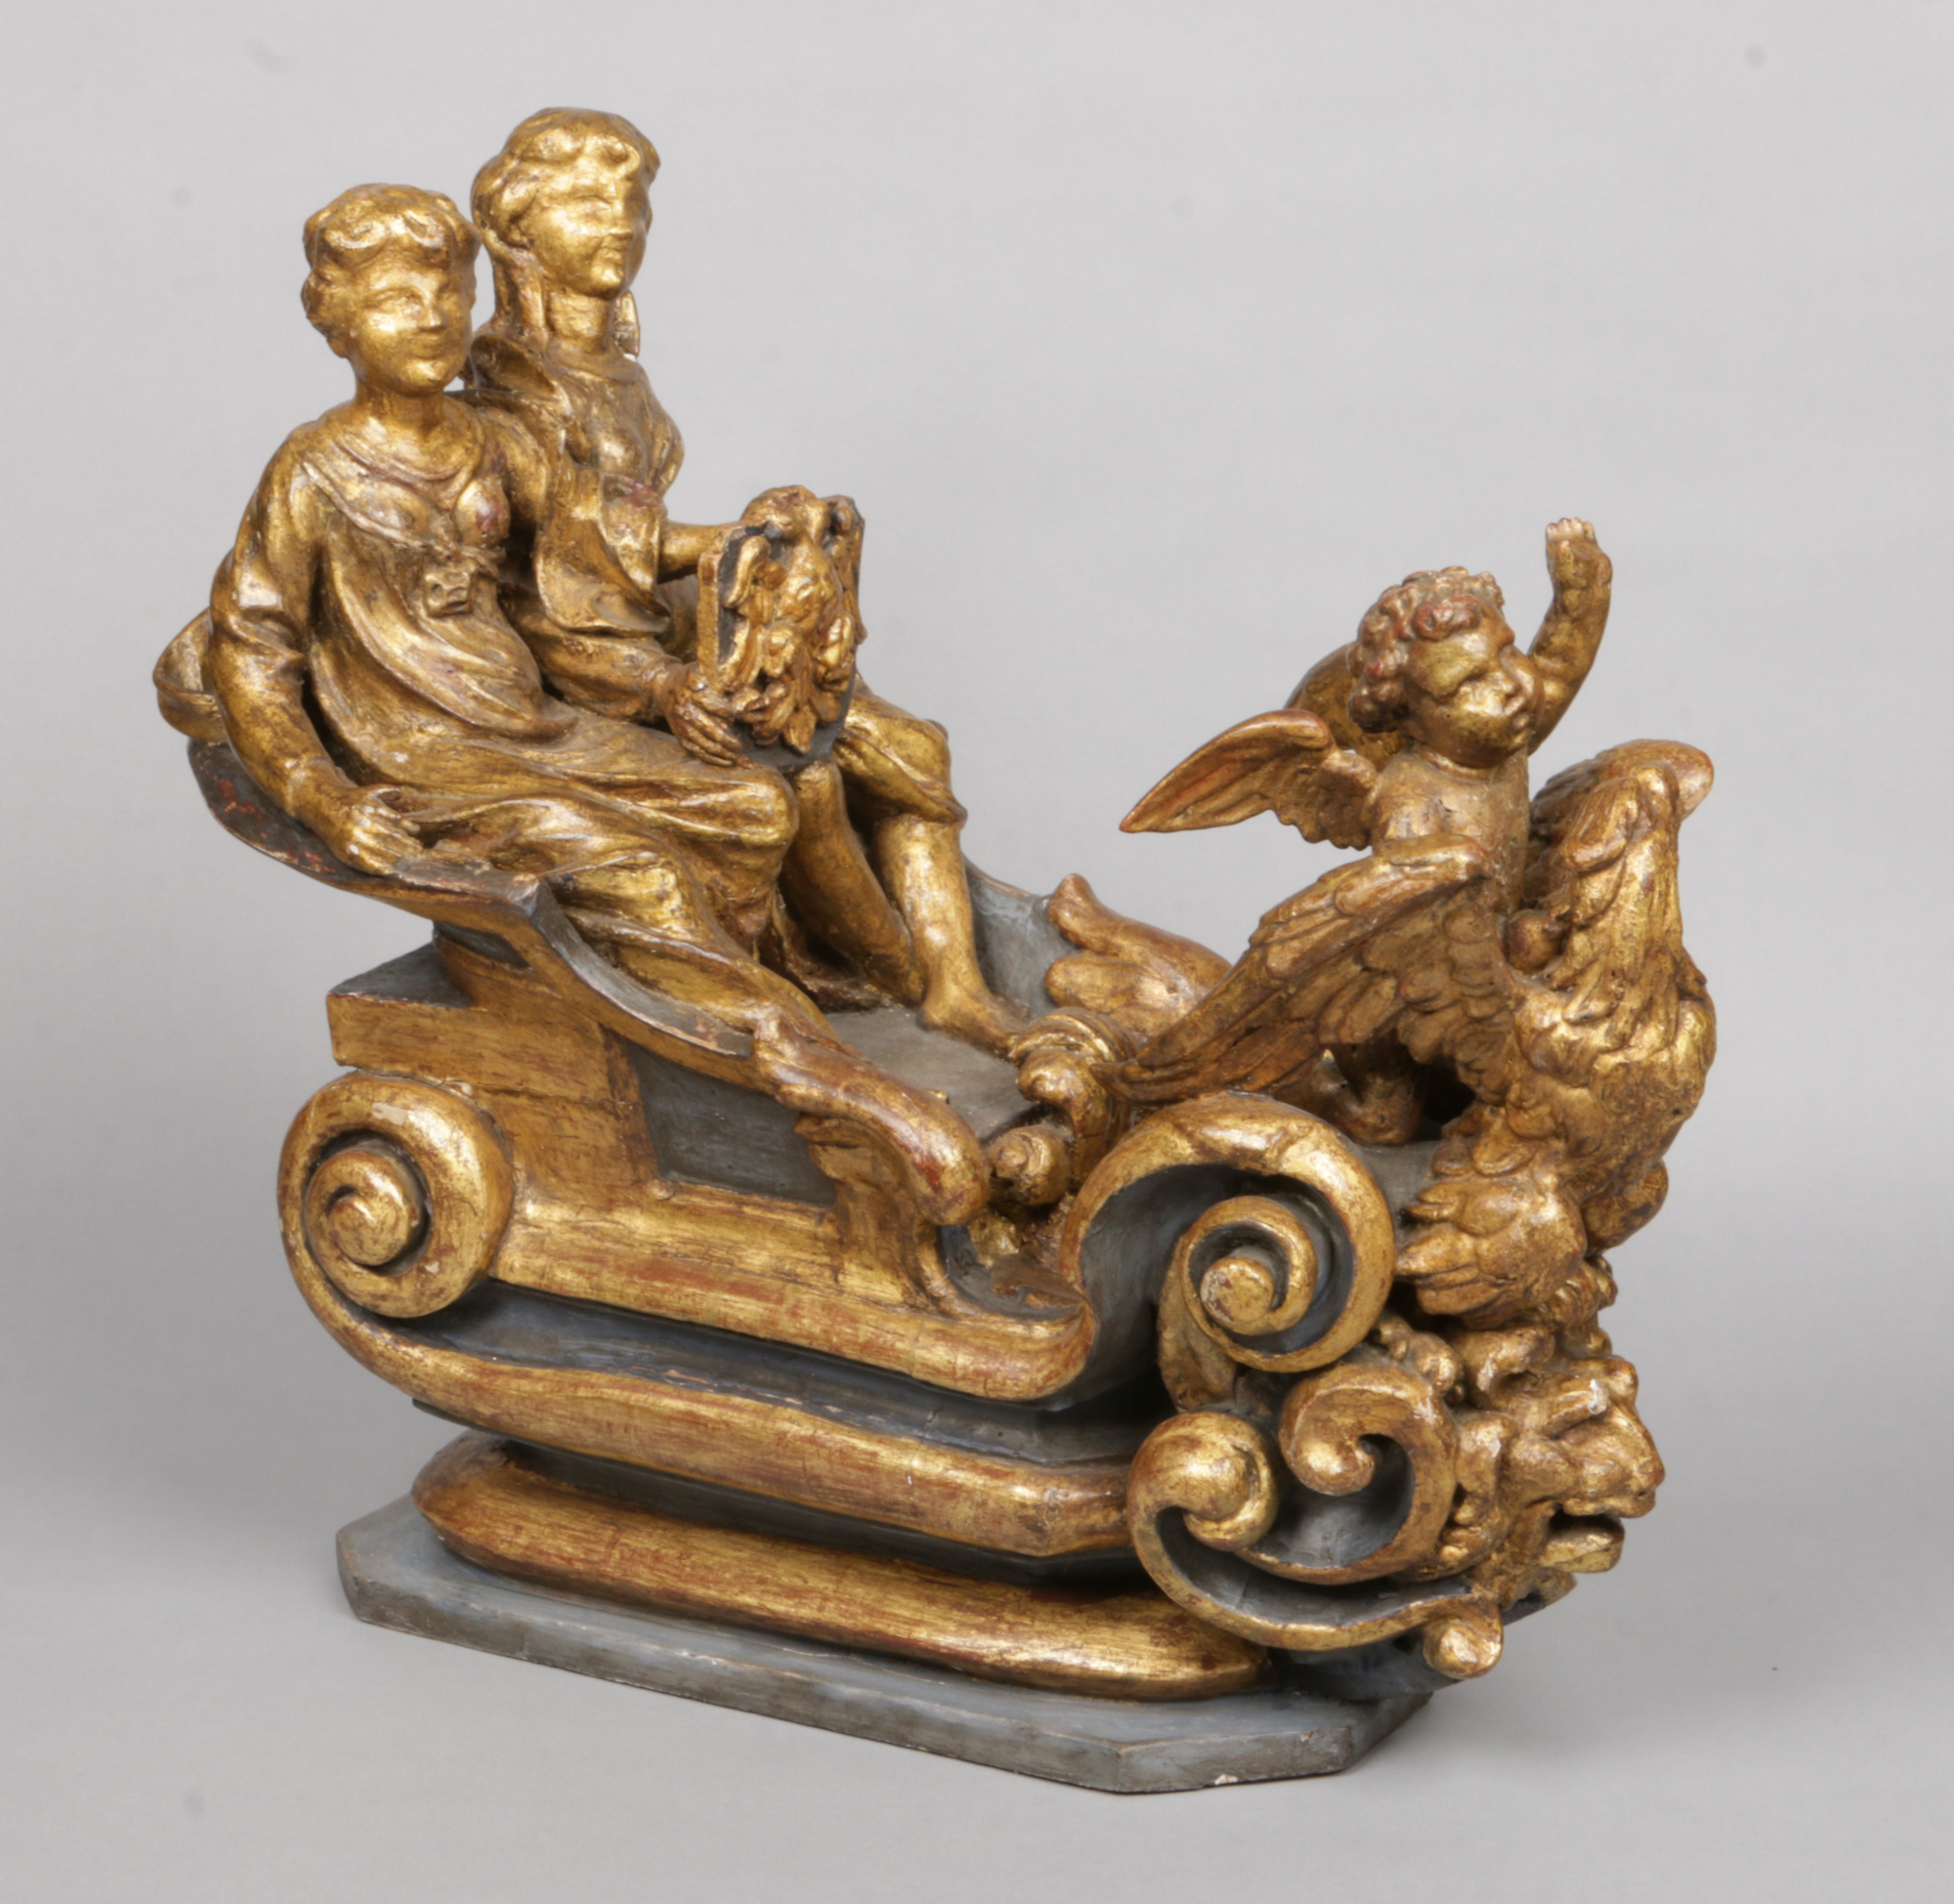 An antique Continental carved giltwood sculpture. Formed as two figures and a winged putti riding in